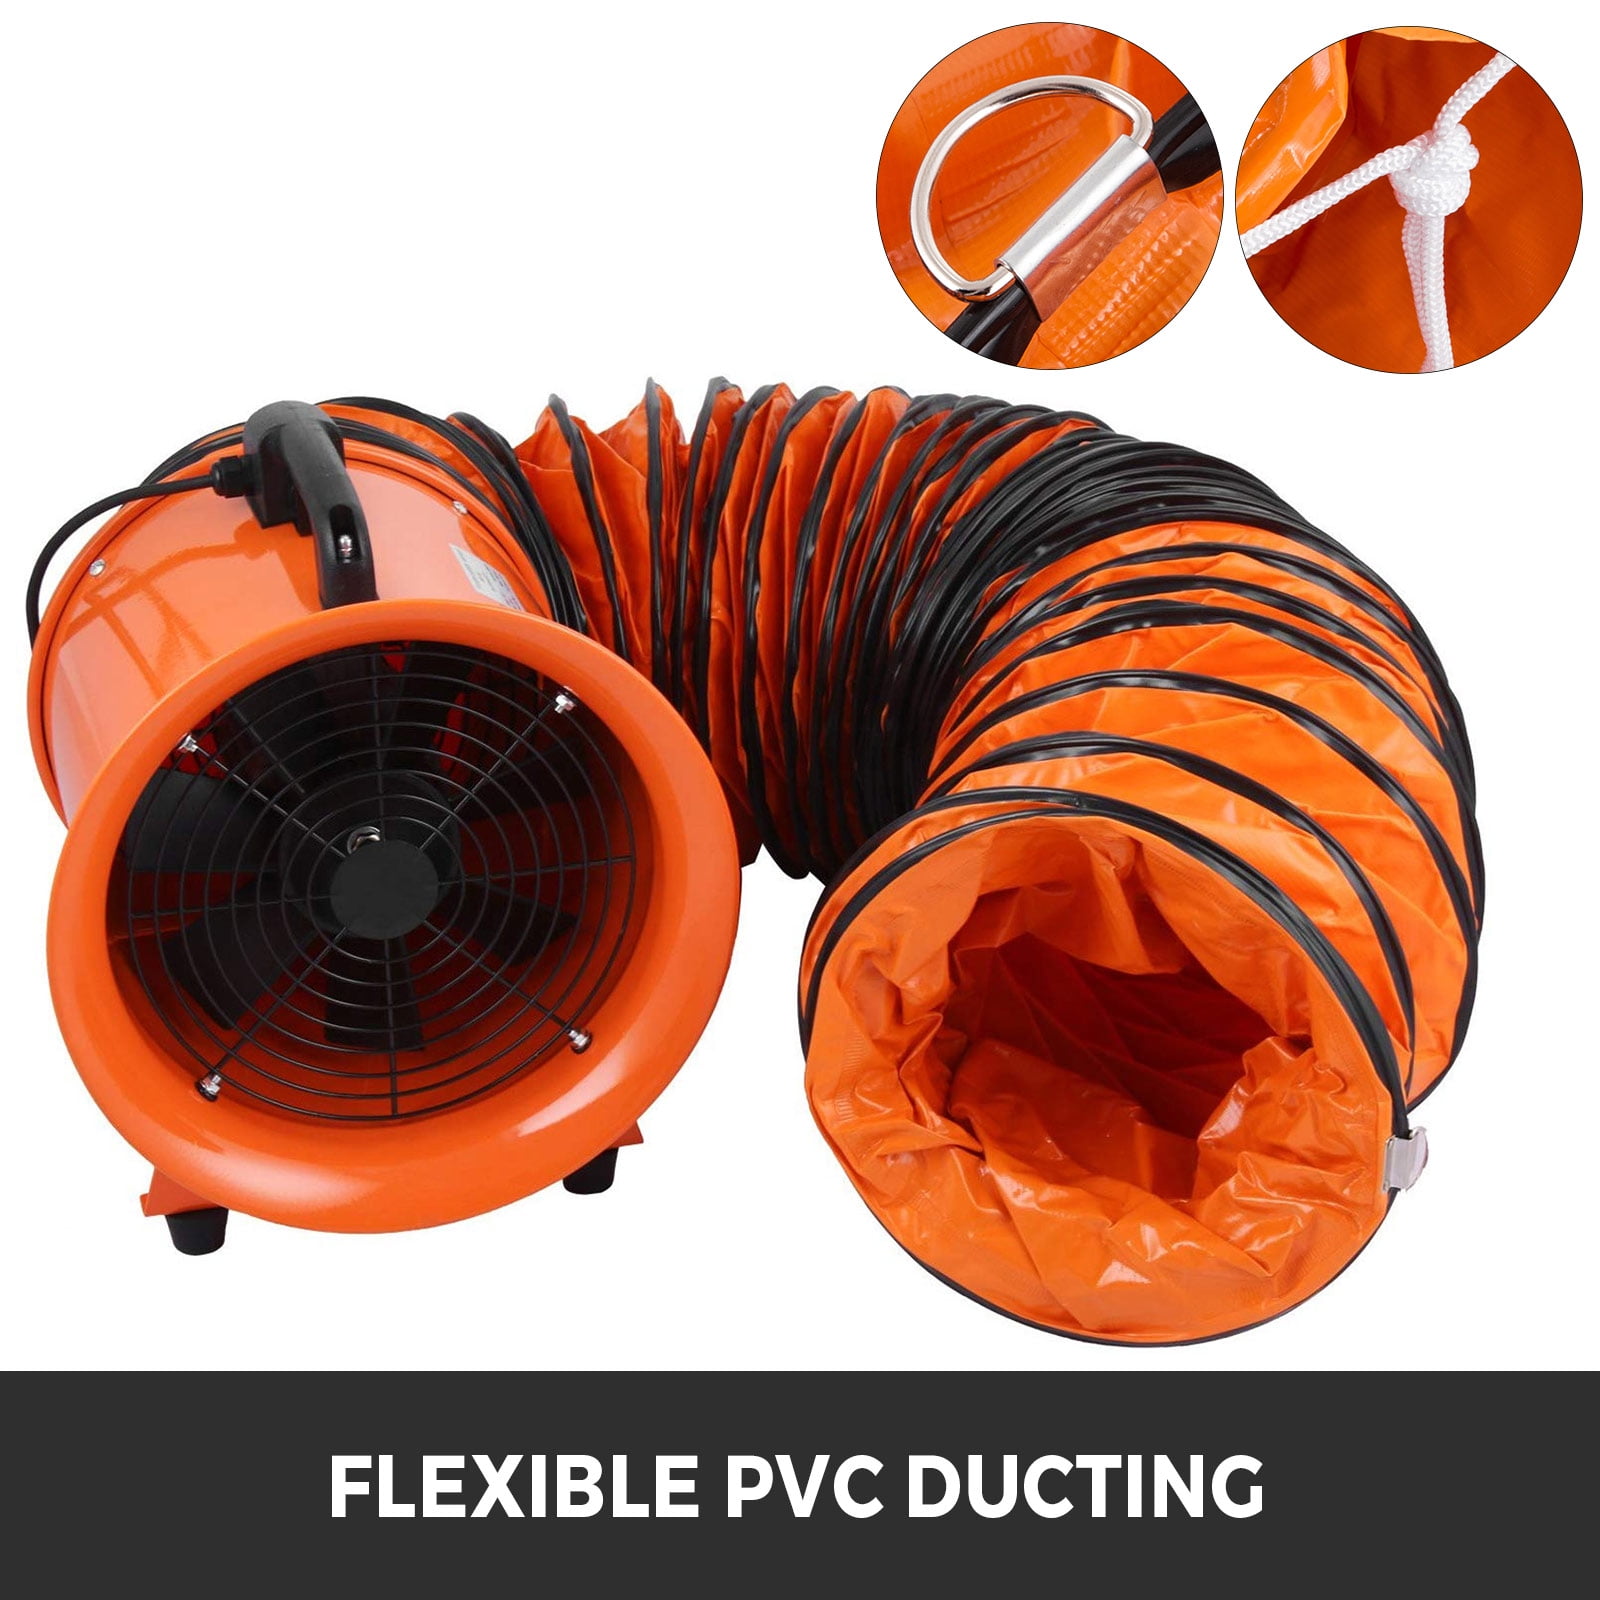 VEVOR Utility Blower 12 inch 0.7 HP 2295 CFM 3300 RPM Portable Ventilator  High Velocity Utility Blower Fan New Style Stand Ventilator Fume Extractor  with 5m Duct Hose - Walmart.com